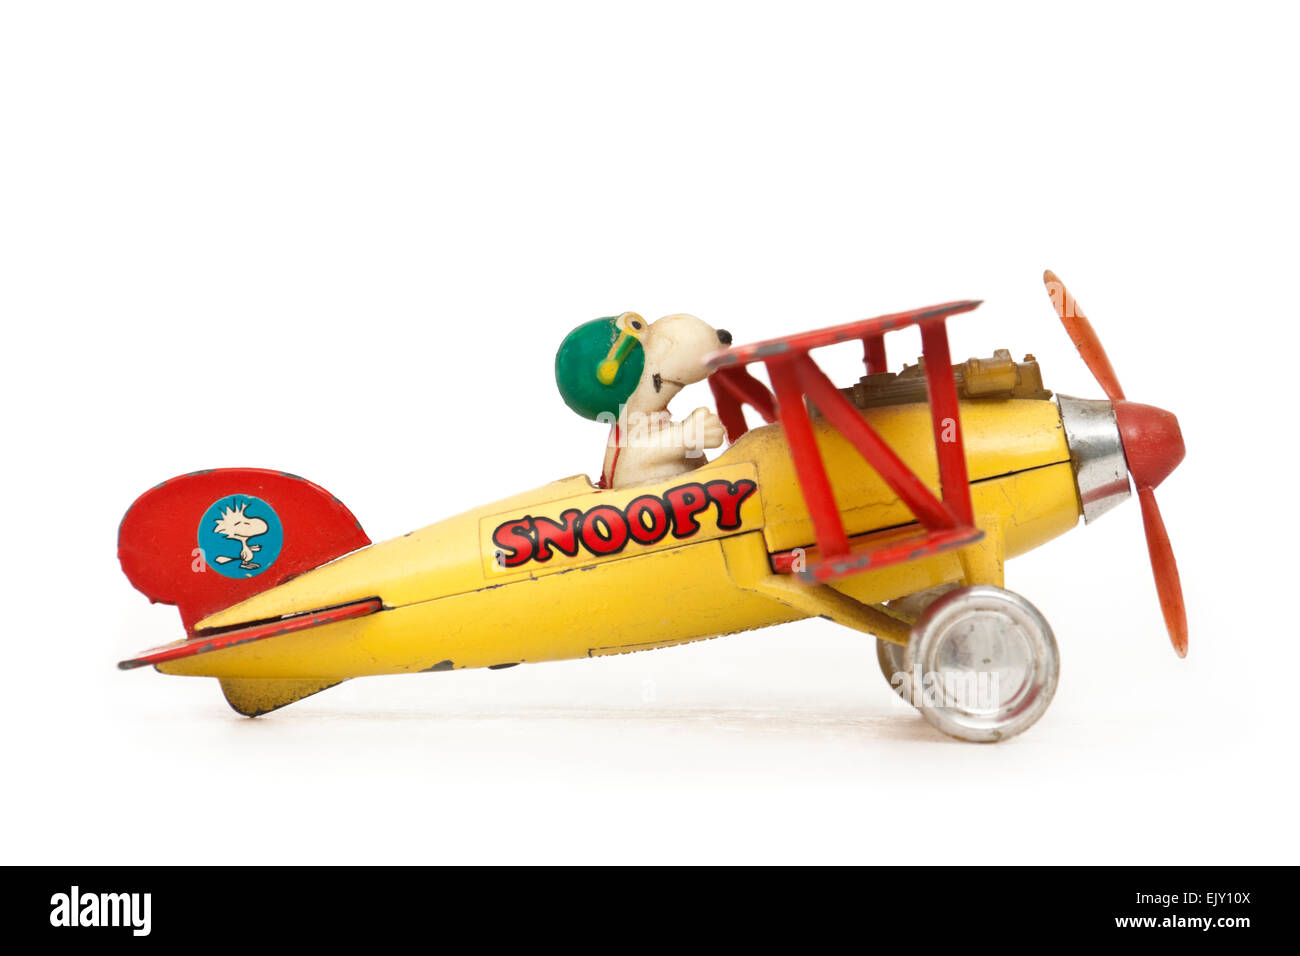 Snoopy (Charlie Brown's dog in Peanuts comic strip) vintage diecast toy airplane by Aviva Toy Co. from 1965 Stock Photo